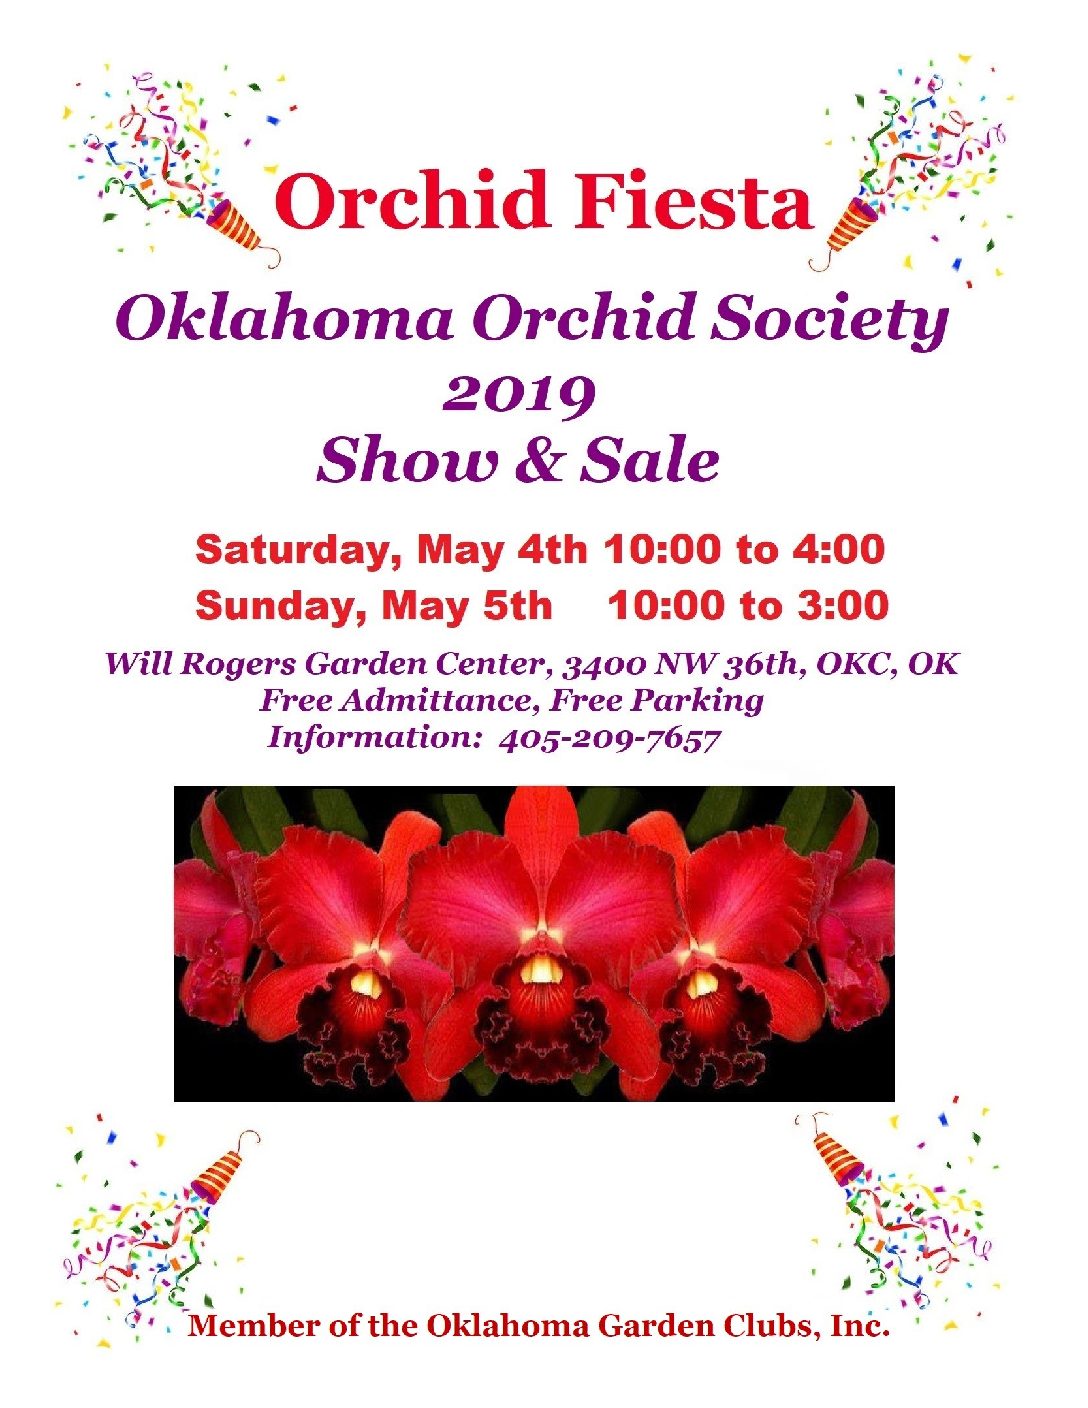 Acadian Orchid Society - Musical Orchids